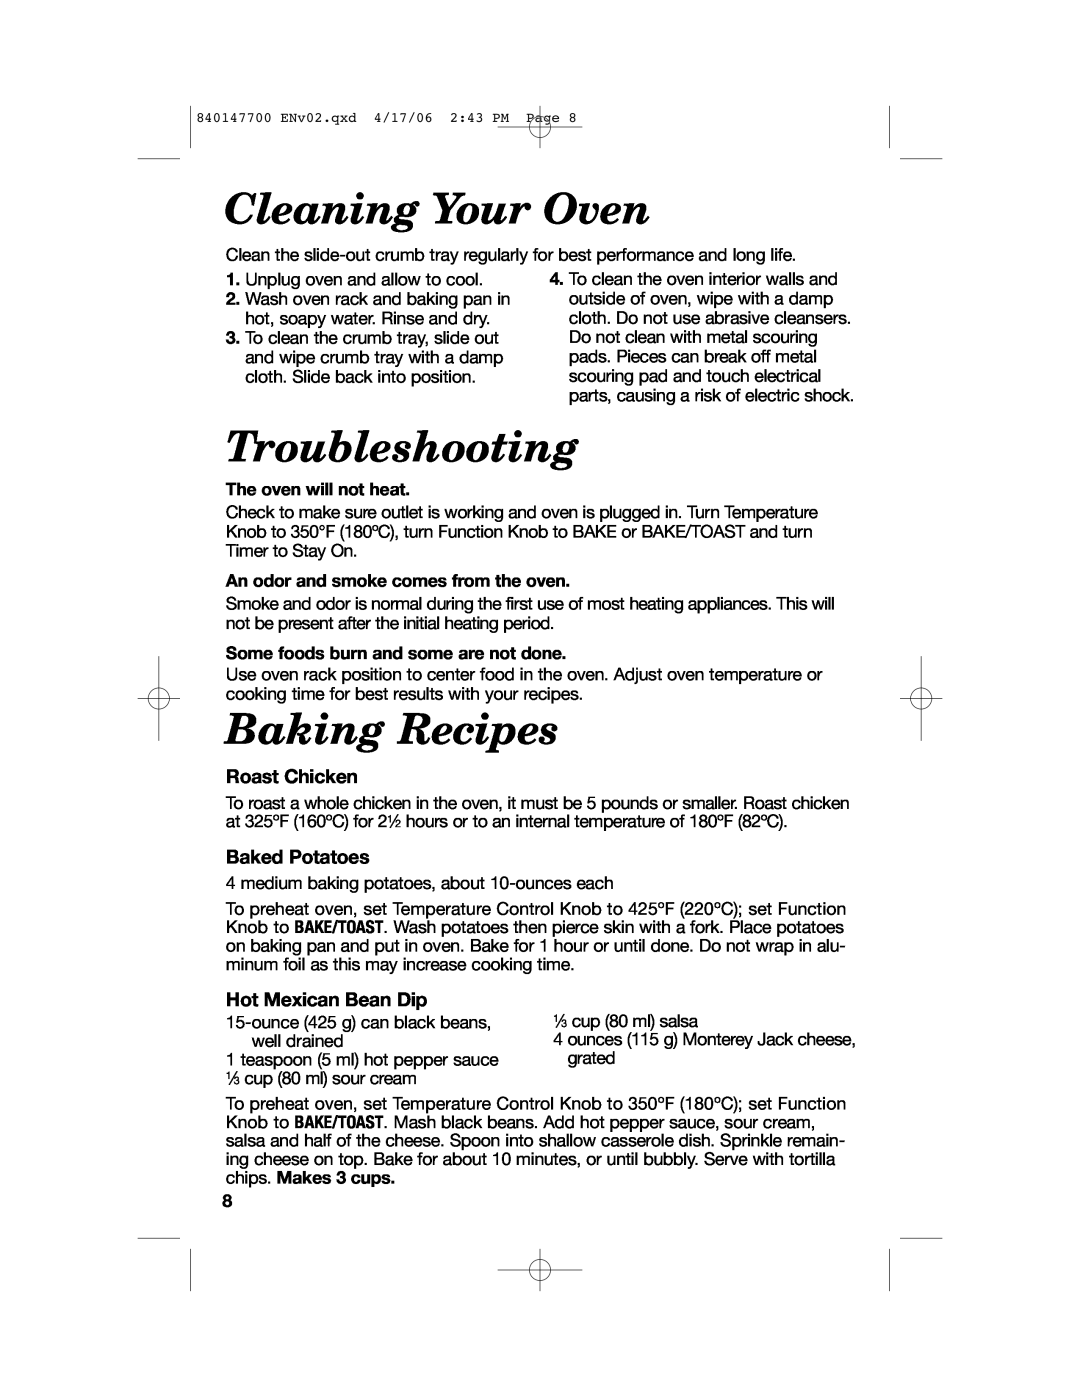 Hamilton Beach 31180 manual Cleaning Your Oven, Troubleshooting, Baking Recipes, Roast Chicken, Baked Potatoes 